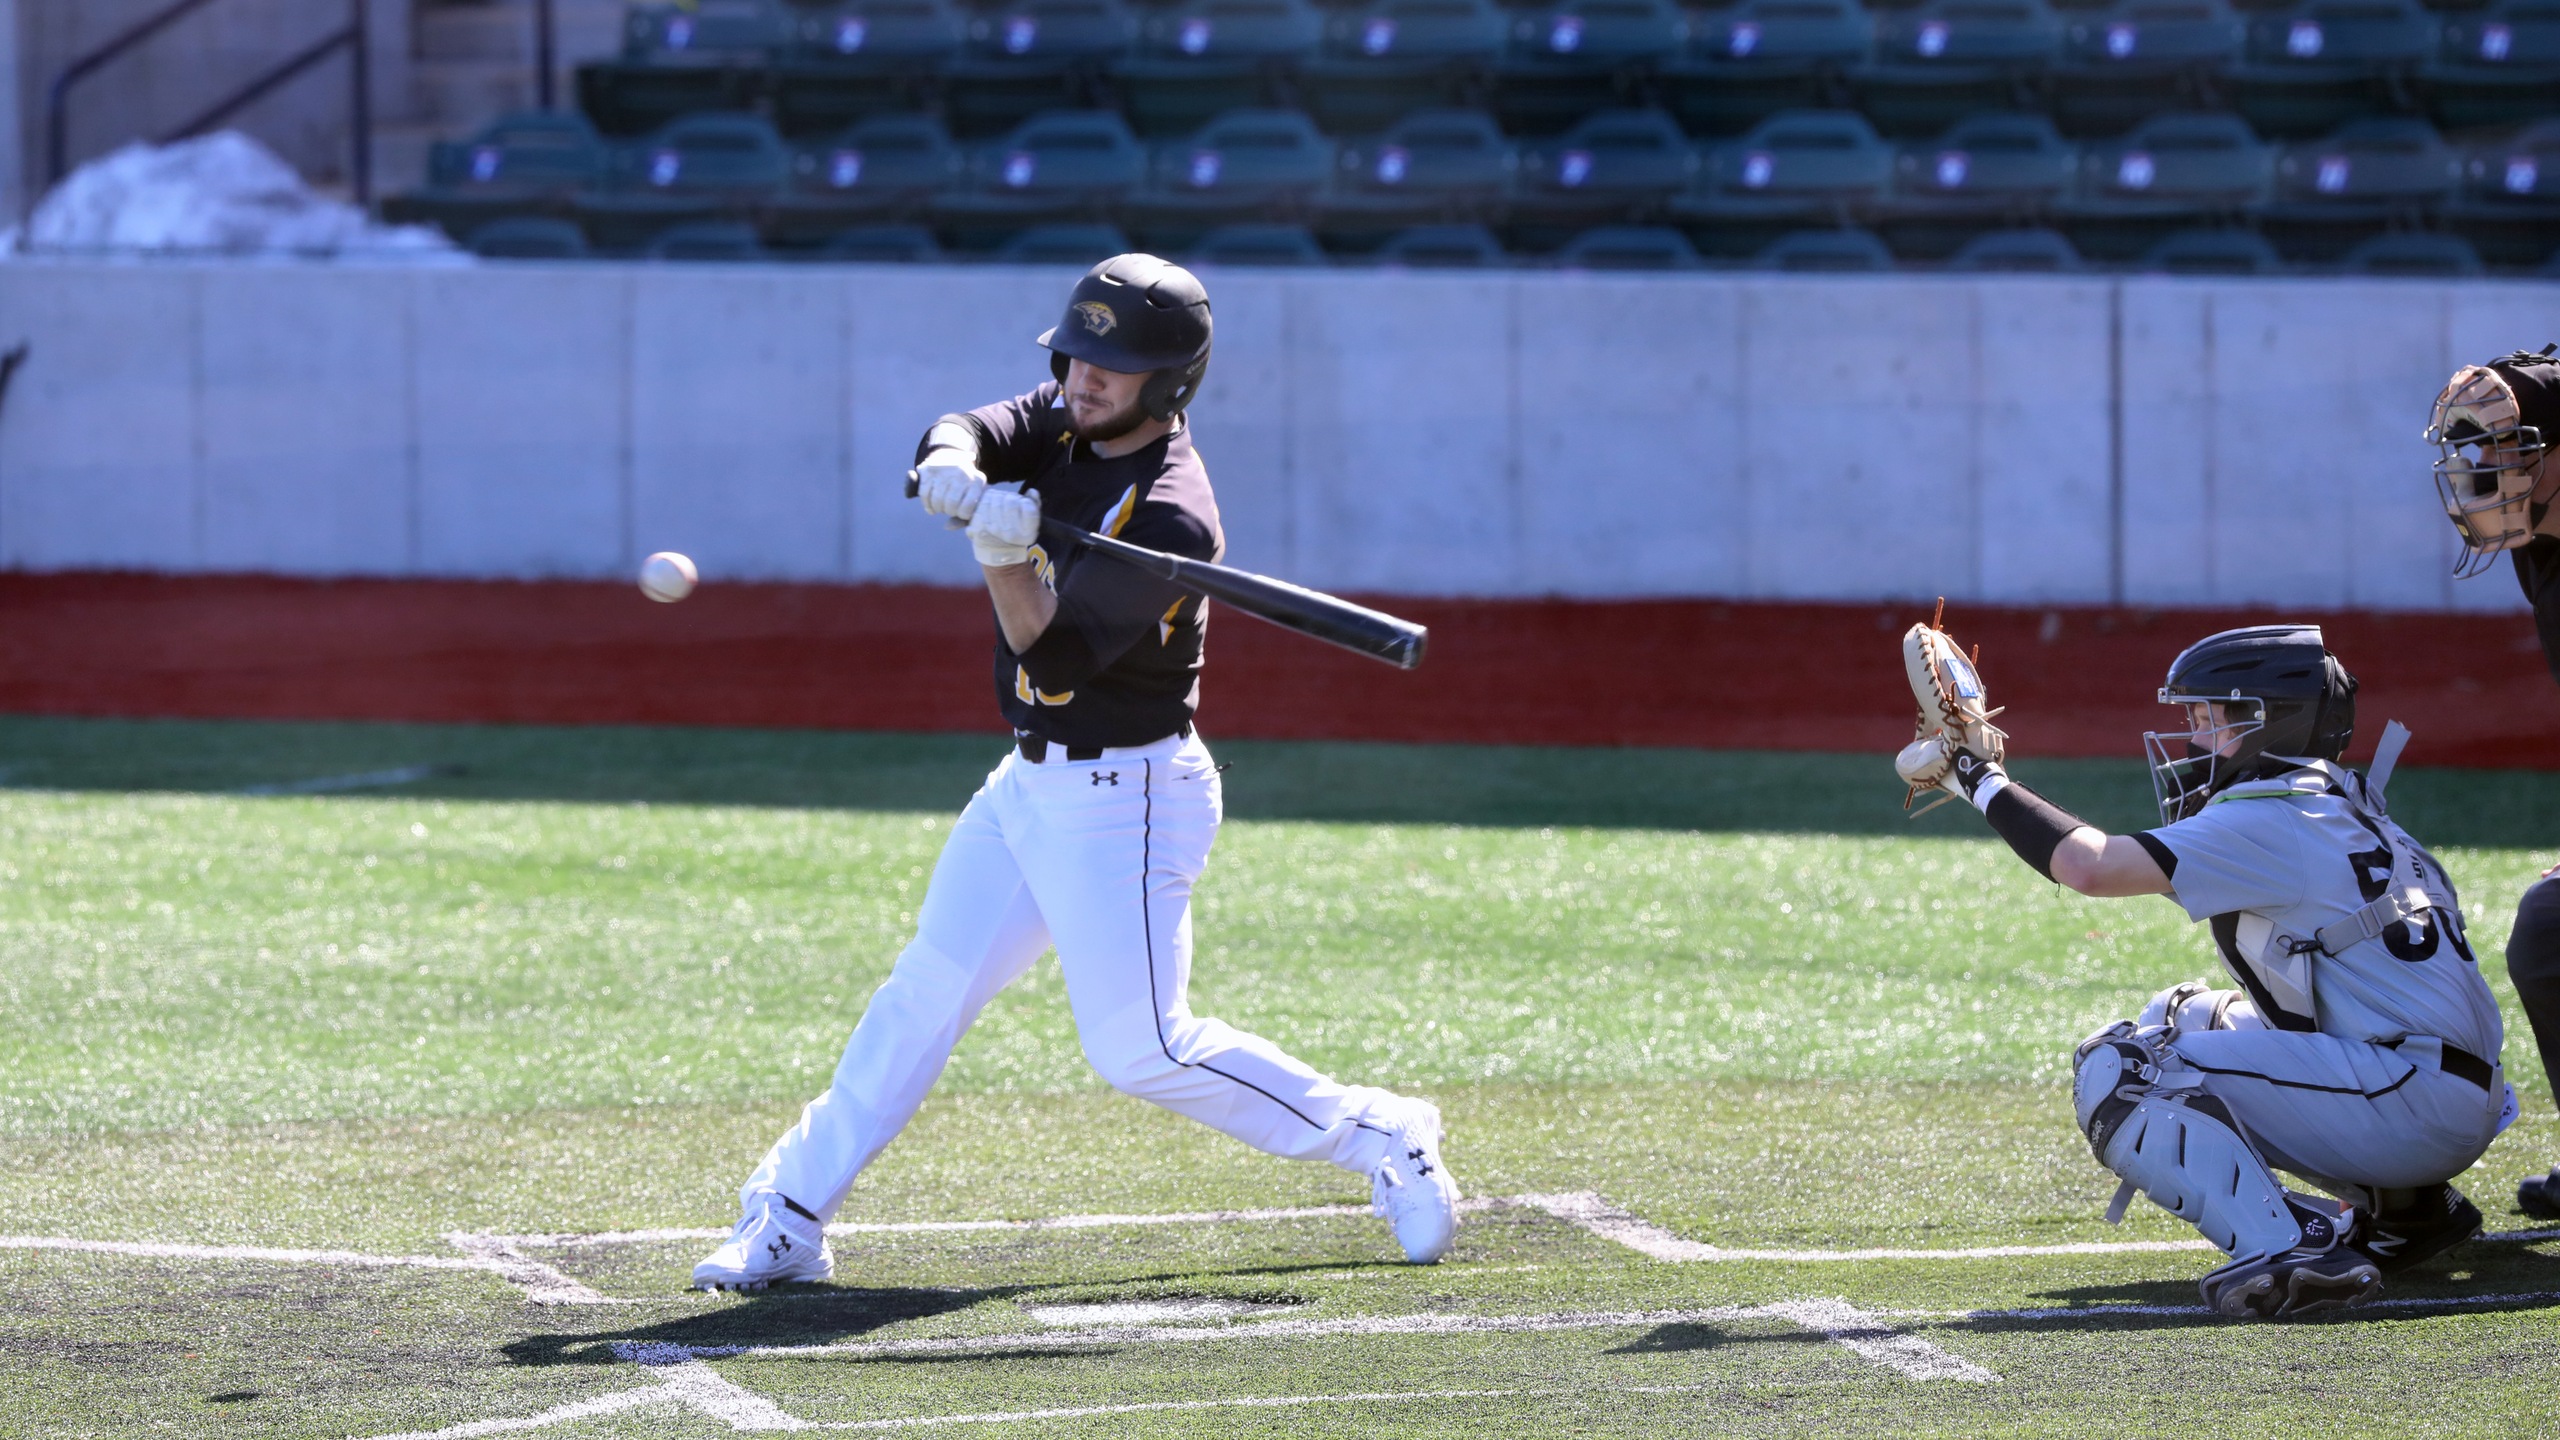 Eric Modaff's four hits against the Pointers included a double and a home run.